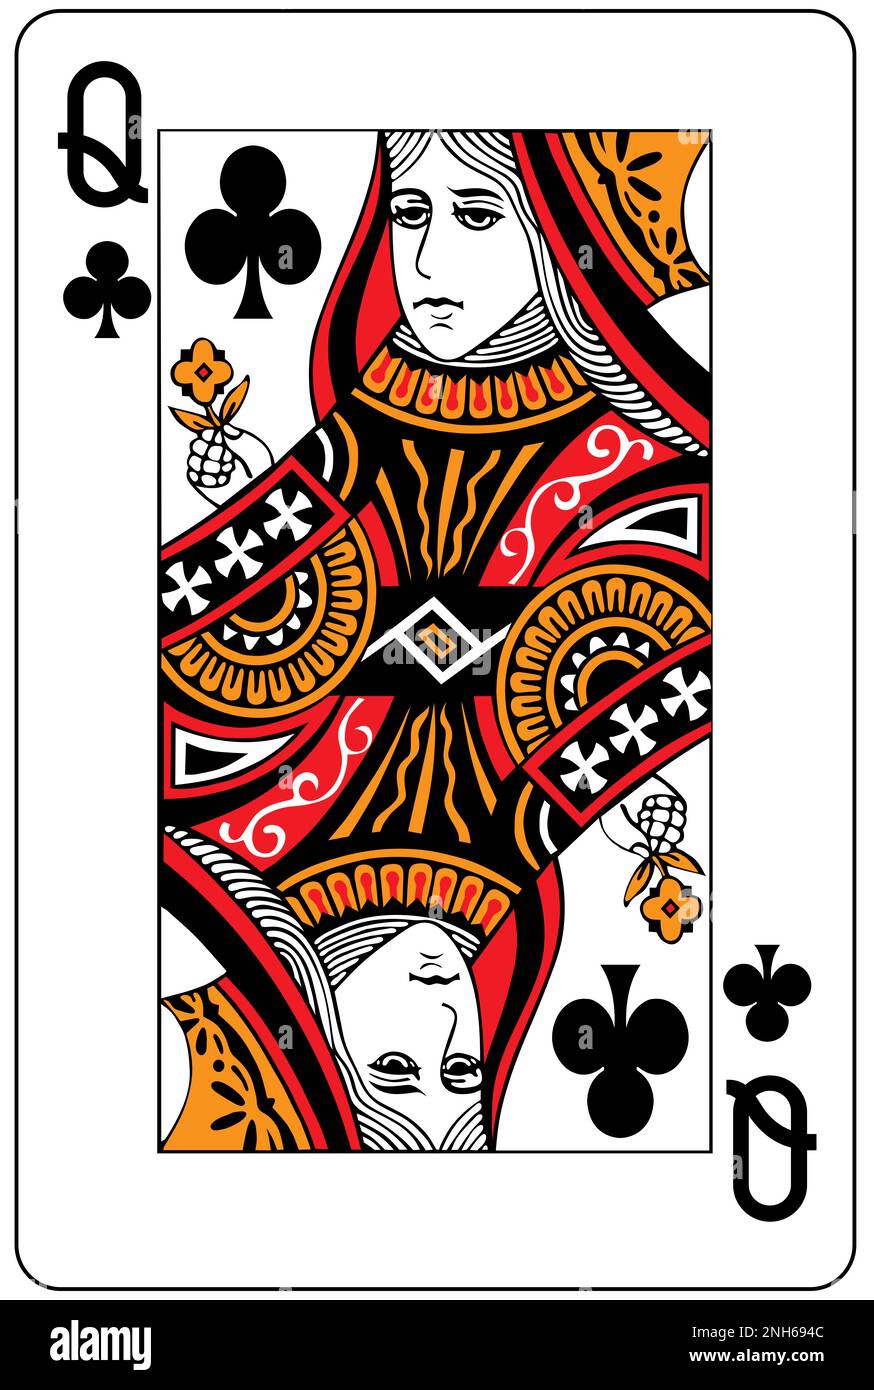 Queen of Clubs playing card Stock Photo - Alamy